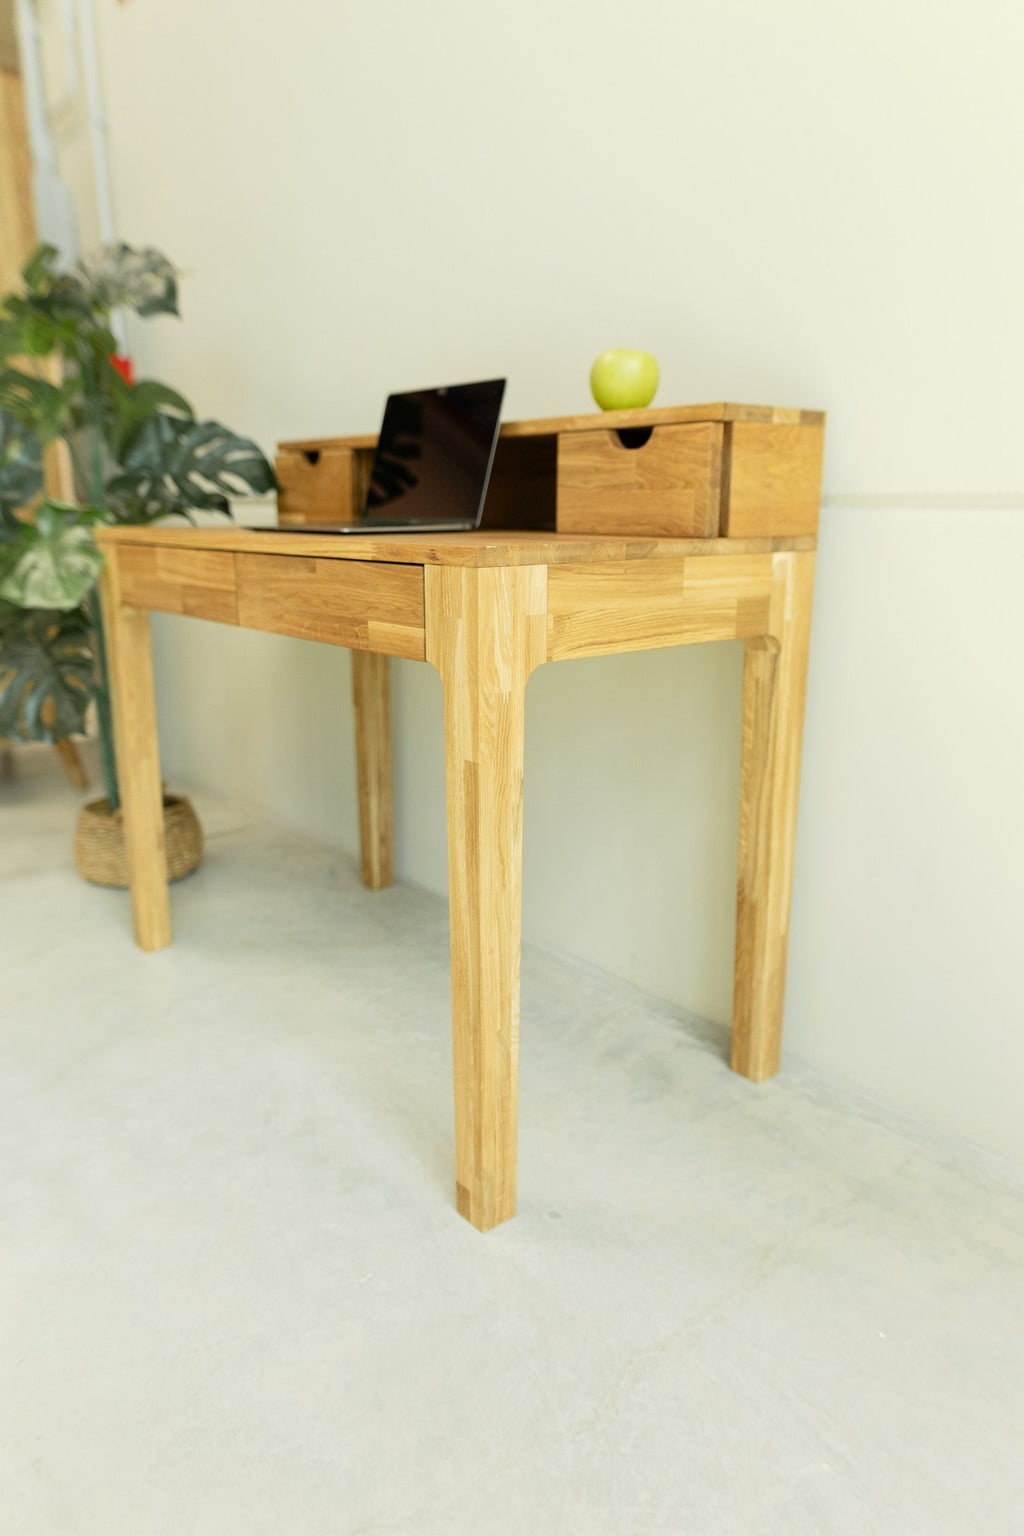 NordicStory Collection Nordic retro style furniture in solid oak